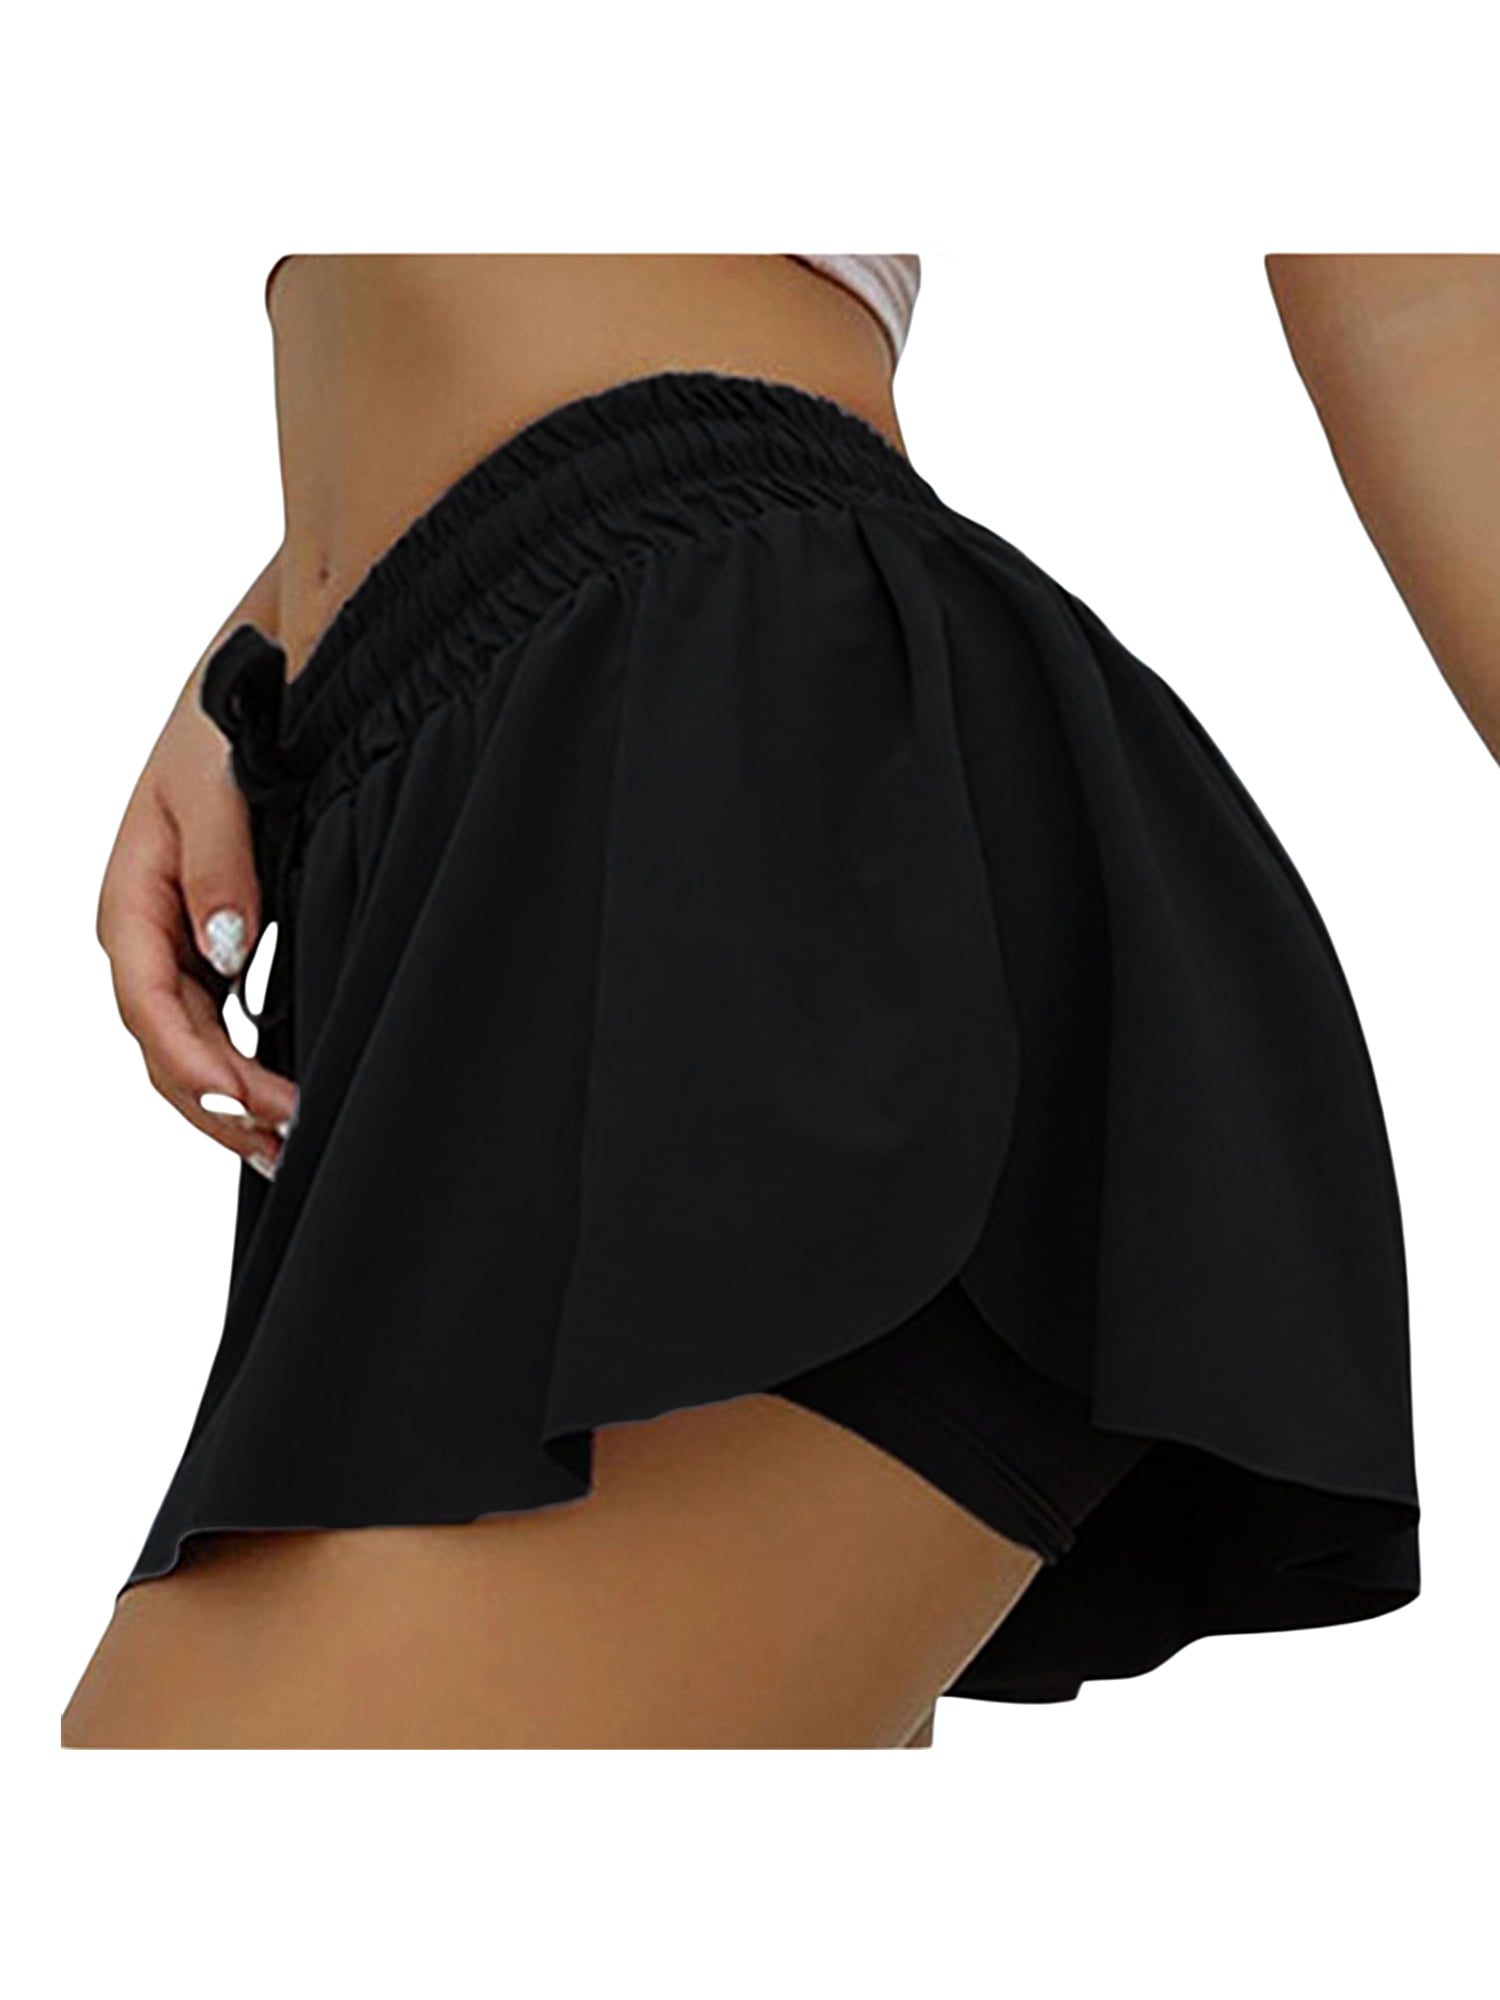 Loliuicca Women Solid Color High Elastic Waist Sports Skirt Simple with  Built-in Slip Shorts Sports Running Skirt - Walmart.com